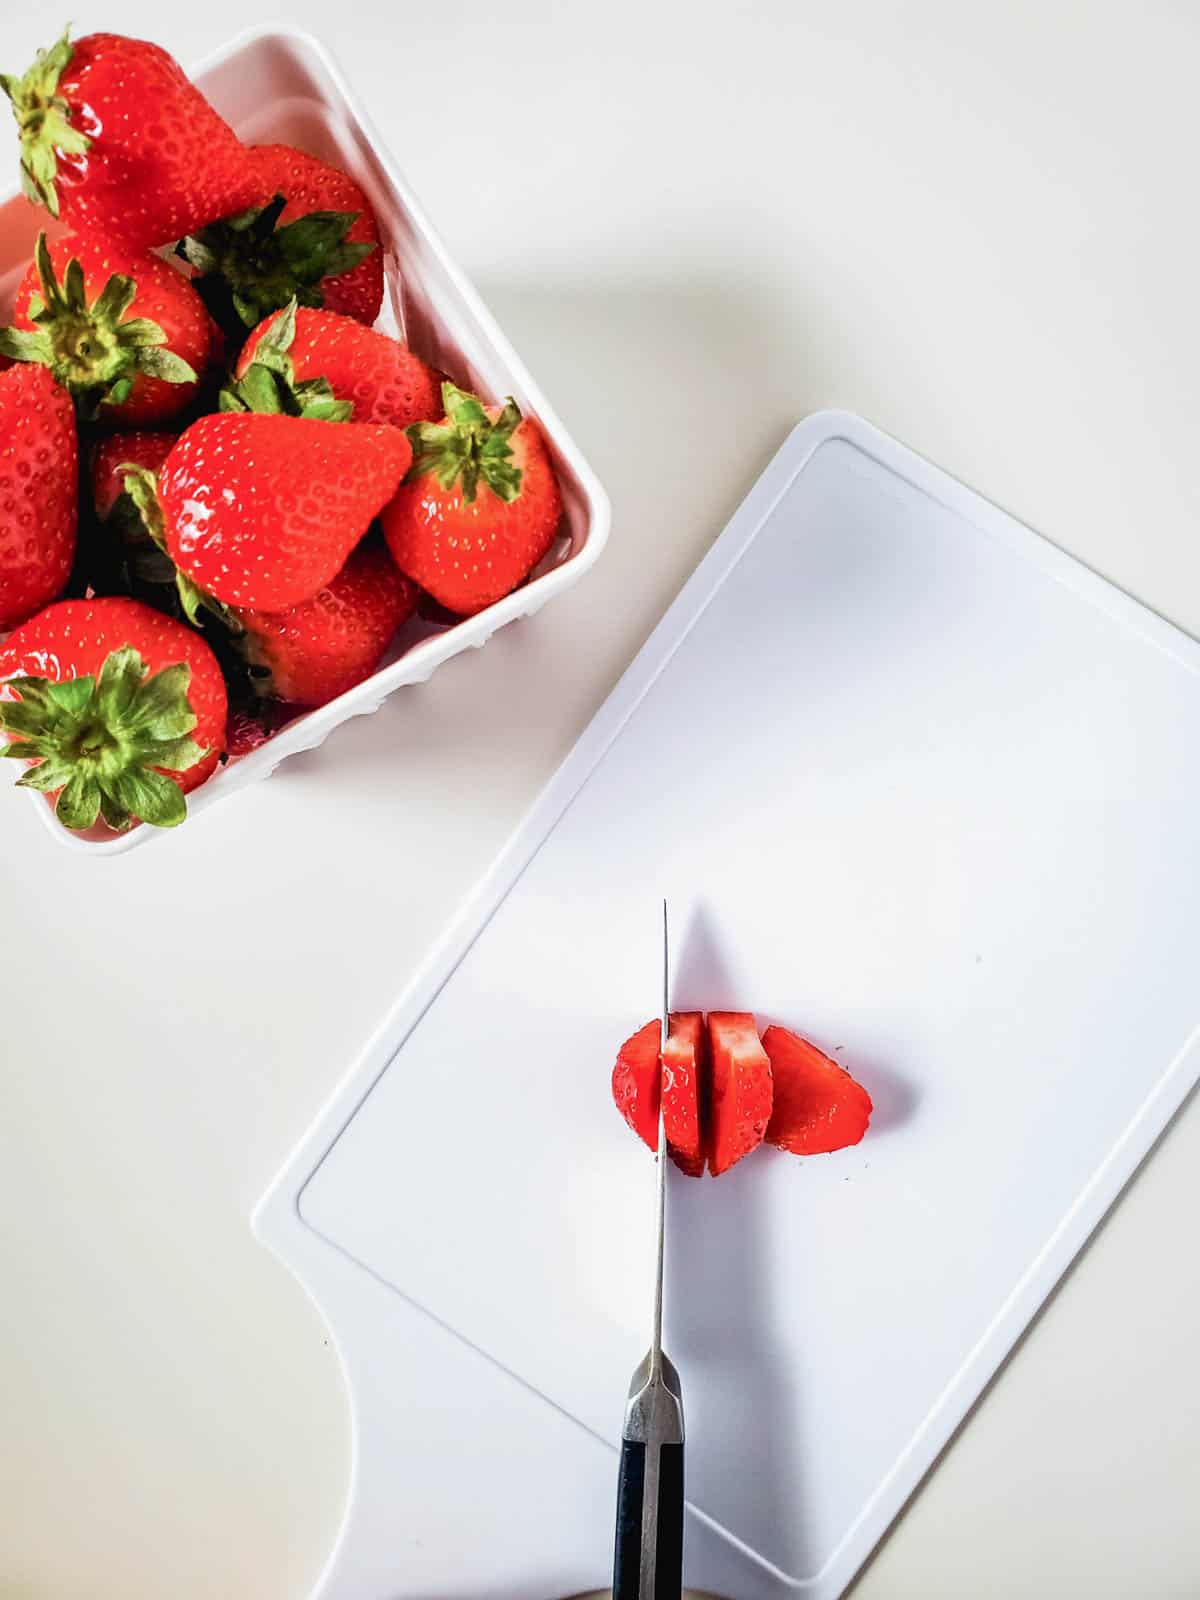 A white cutting board with a strawberry being sliced next to a bowl of more strawberries.